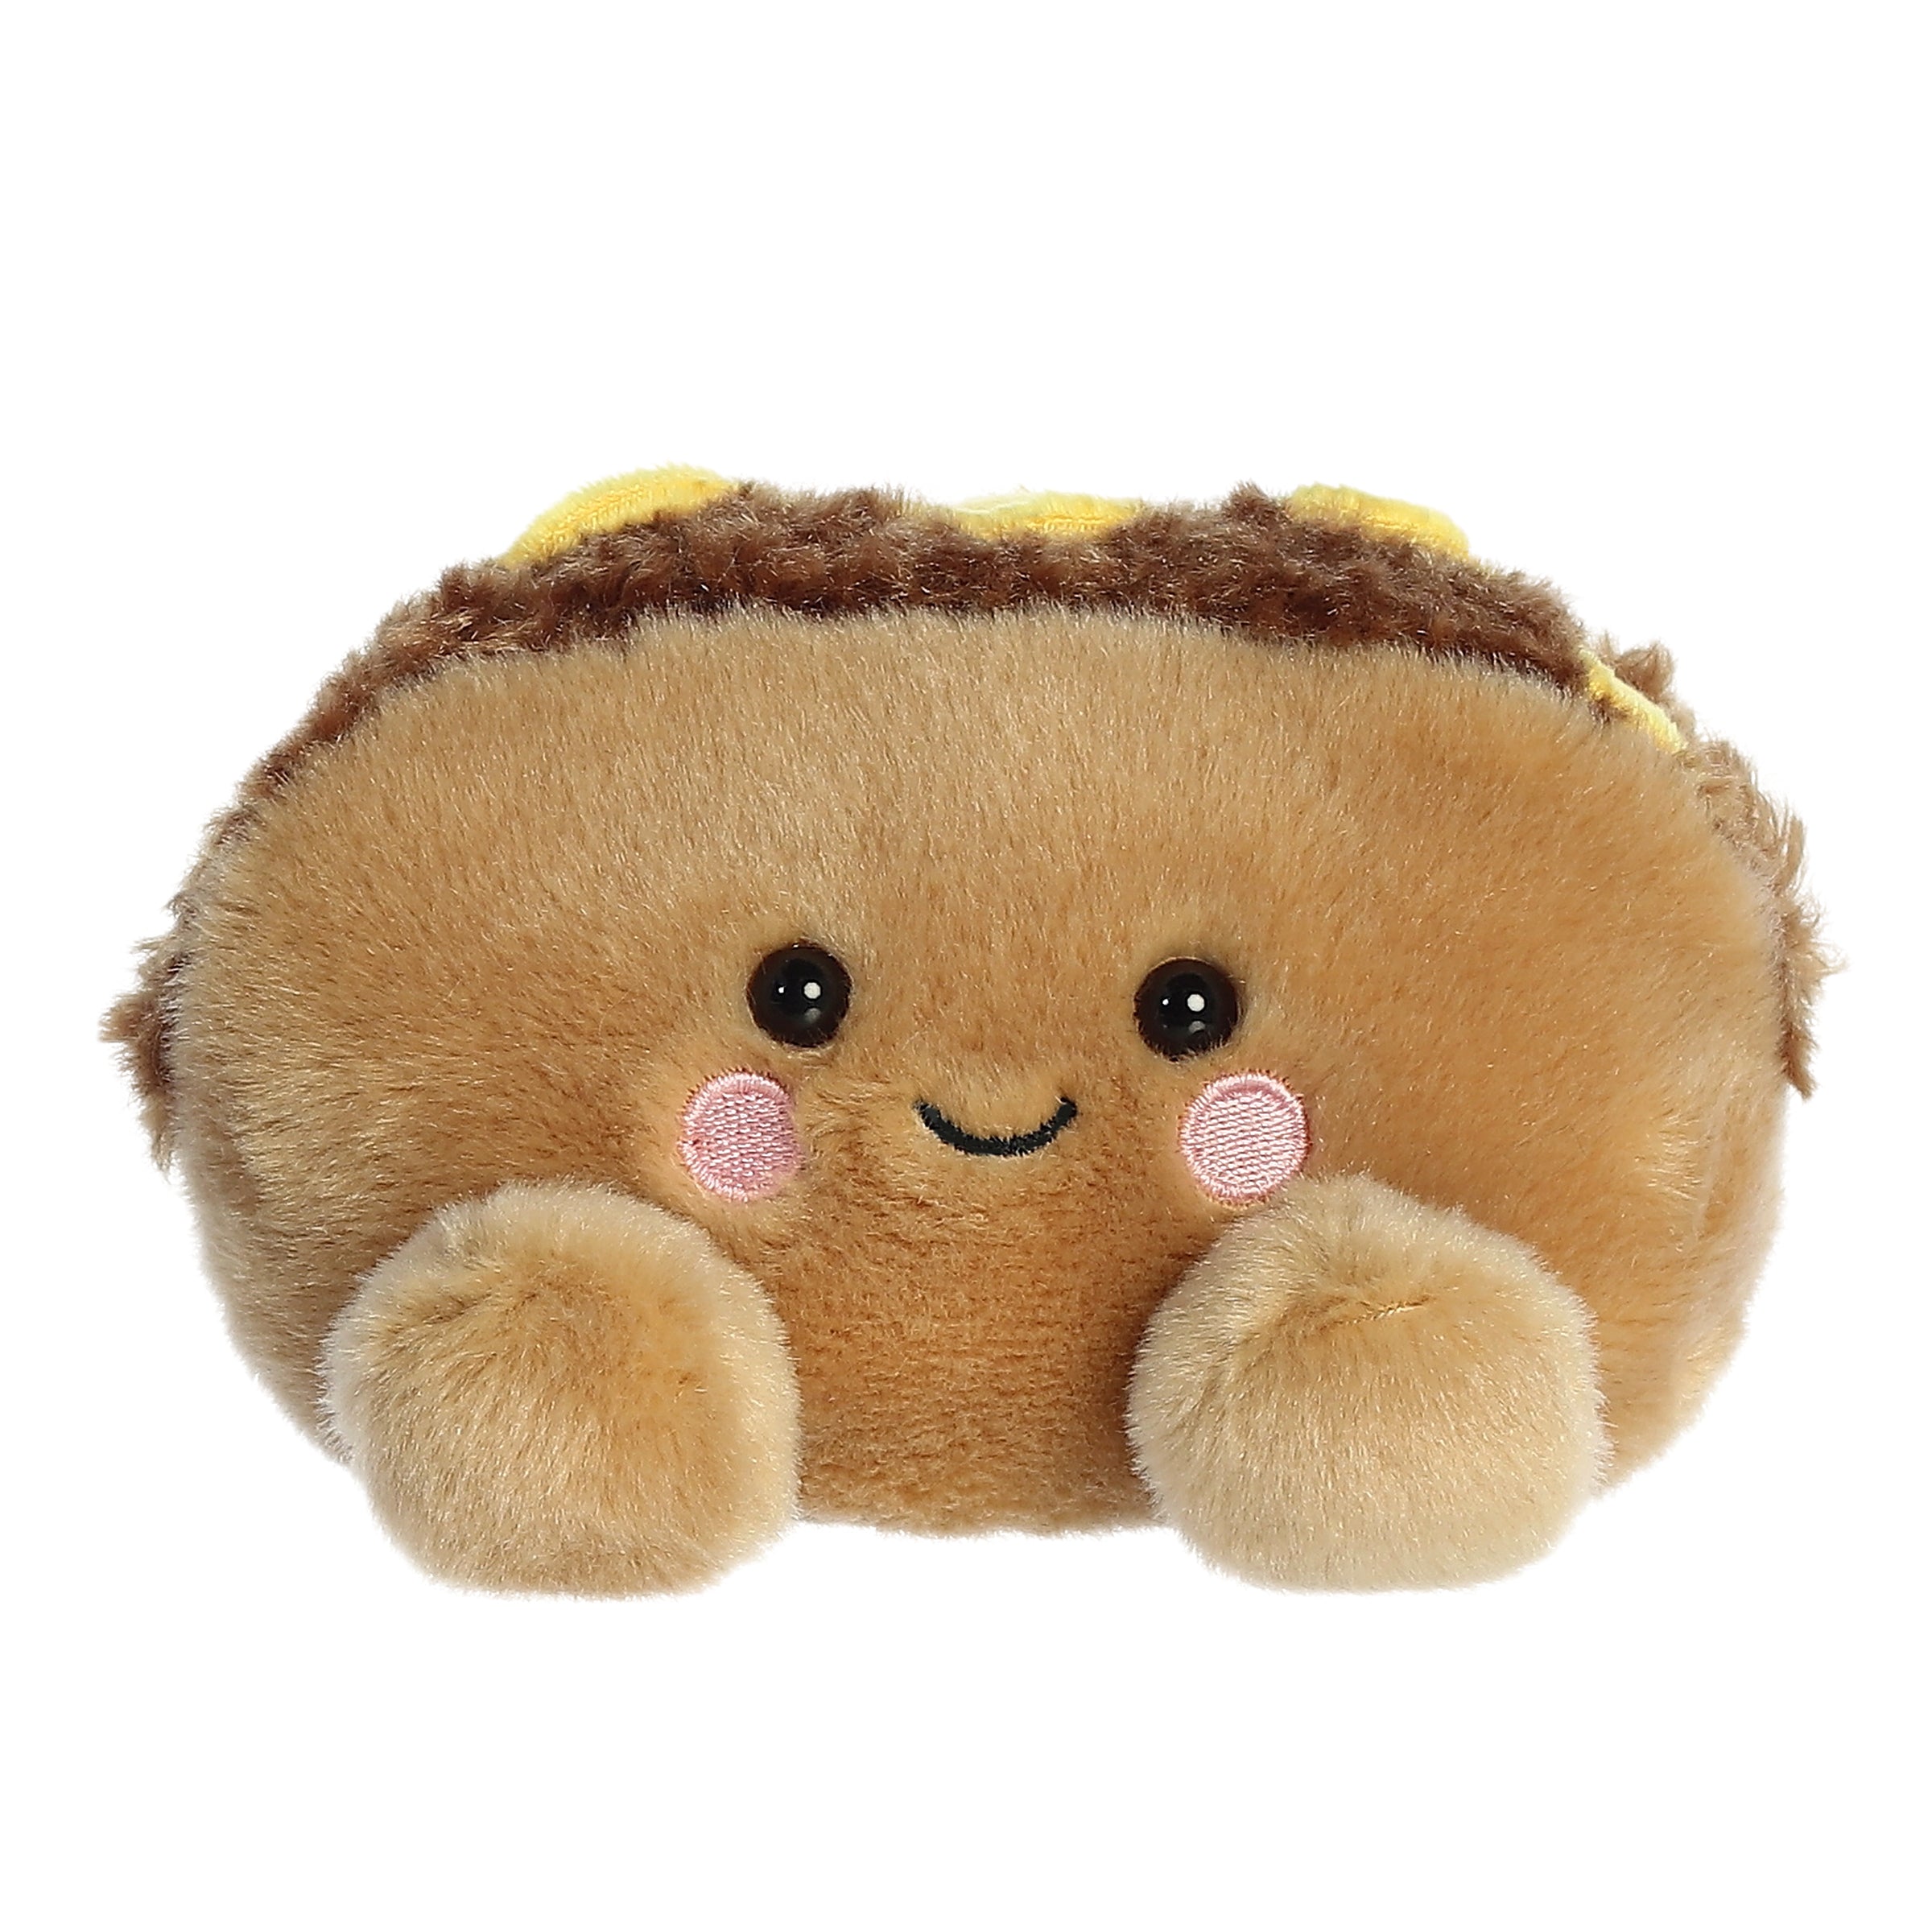 Mike Philly Cheesesteak plush from Palm Pals, with a warm bun and charming smile, symbolizes comfort and adventure